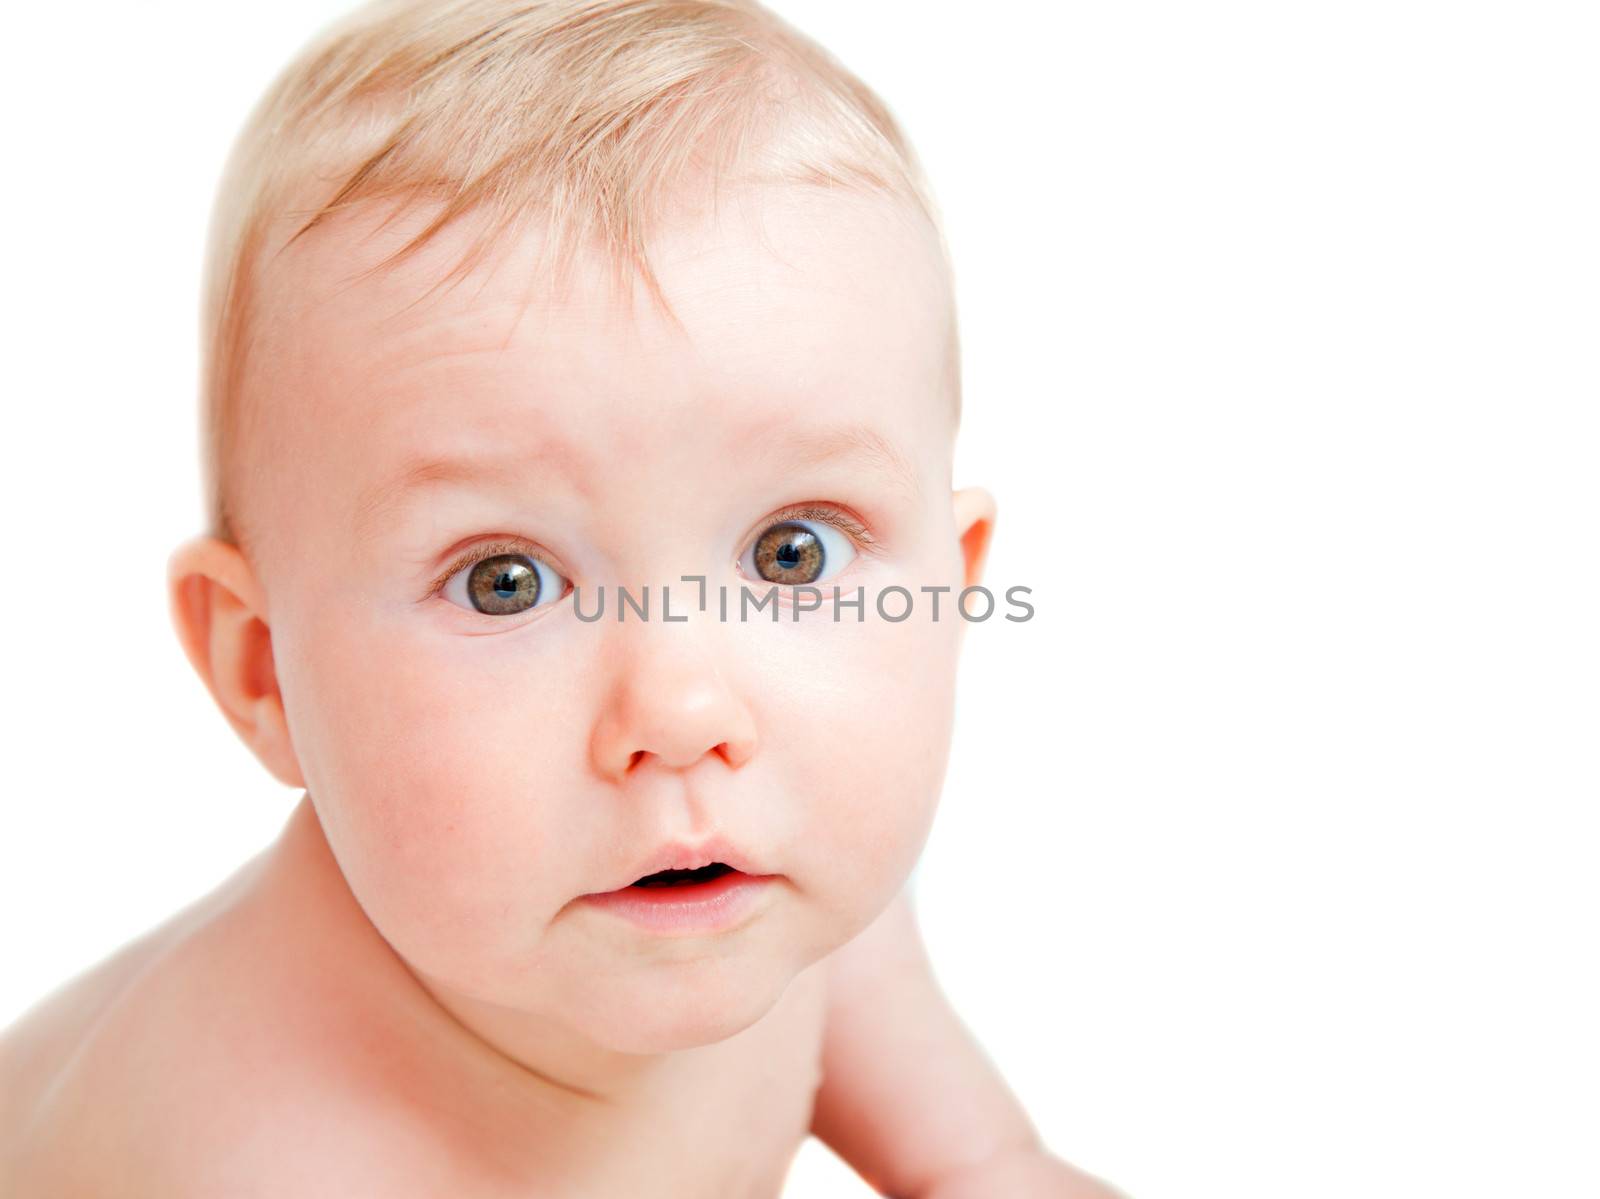 Cute baby with surprised face expression by photocreo